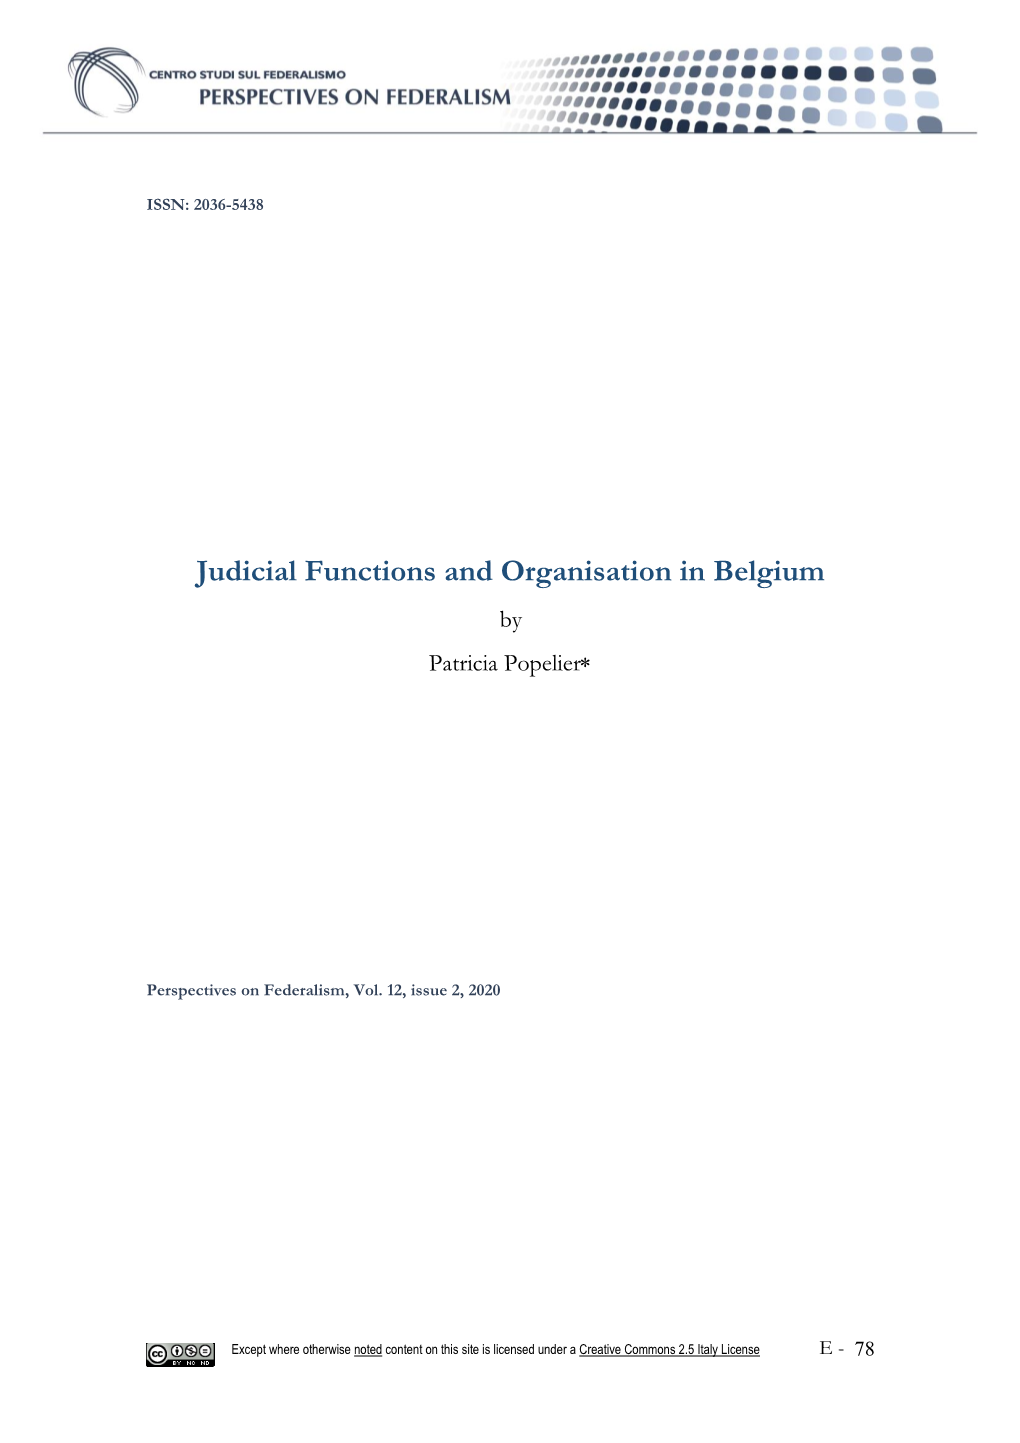 Judicial Functions and Organisation in Belgium by Patricia Popelier